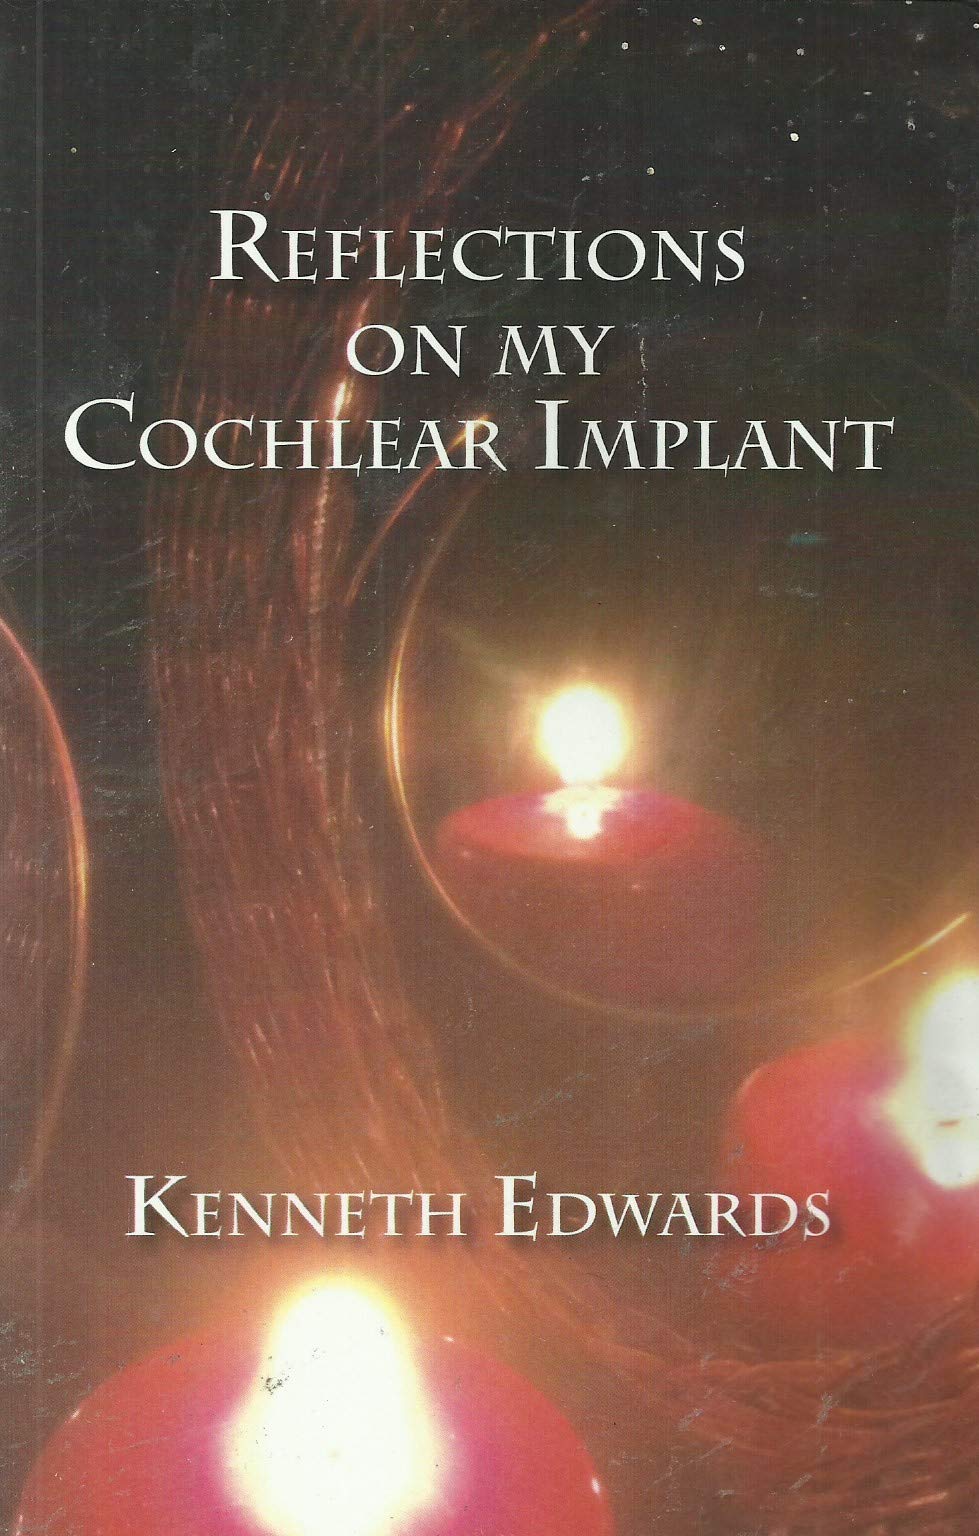 Reflections on my Cochlear Implant